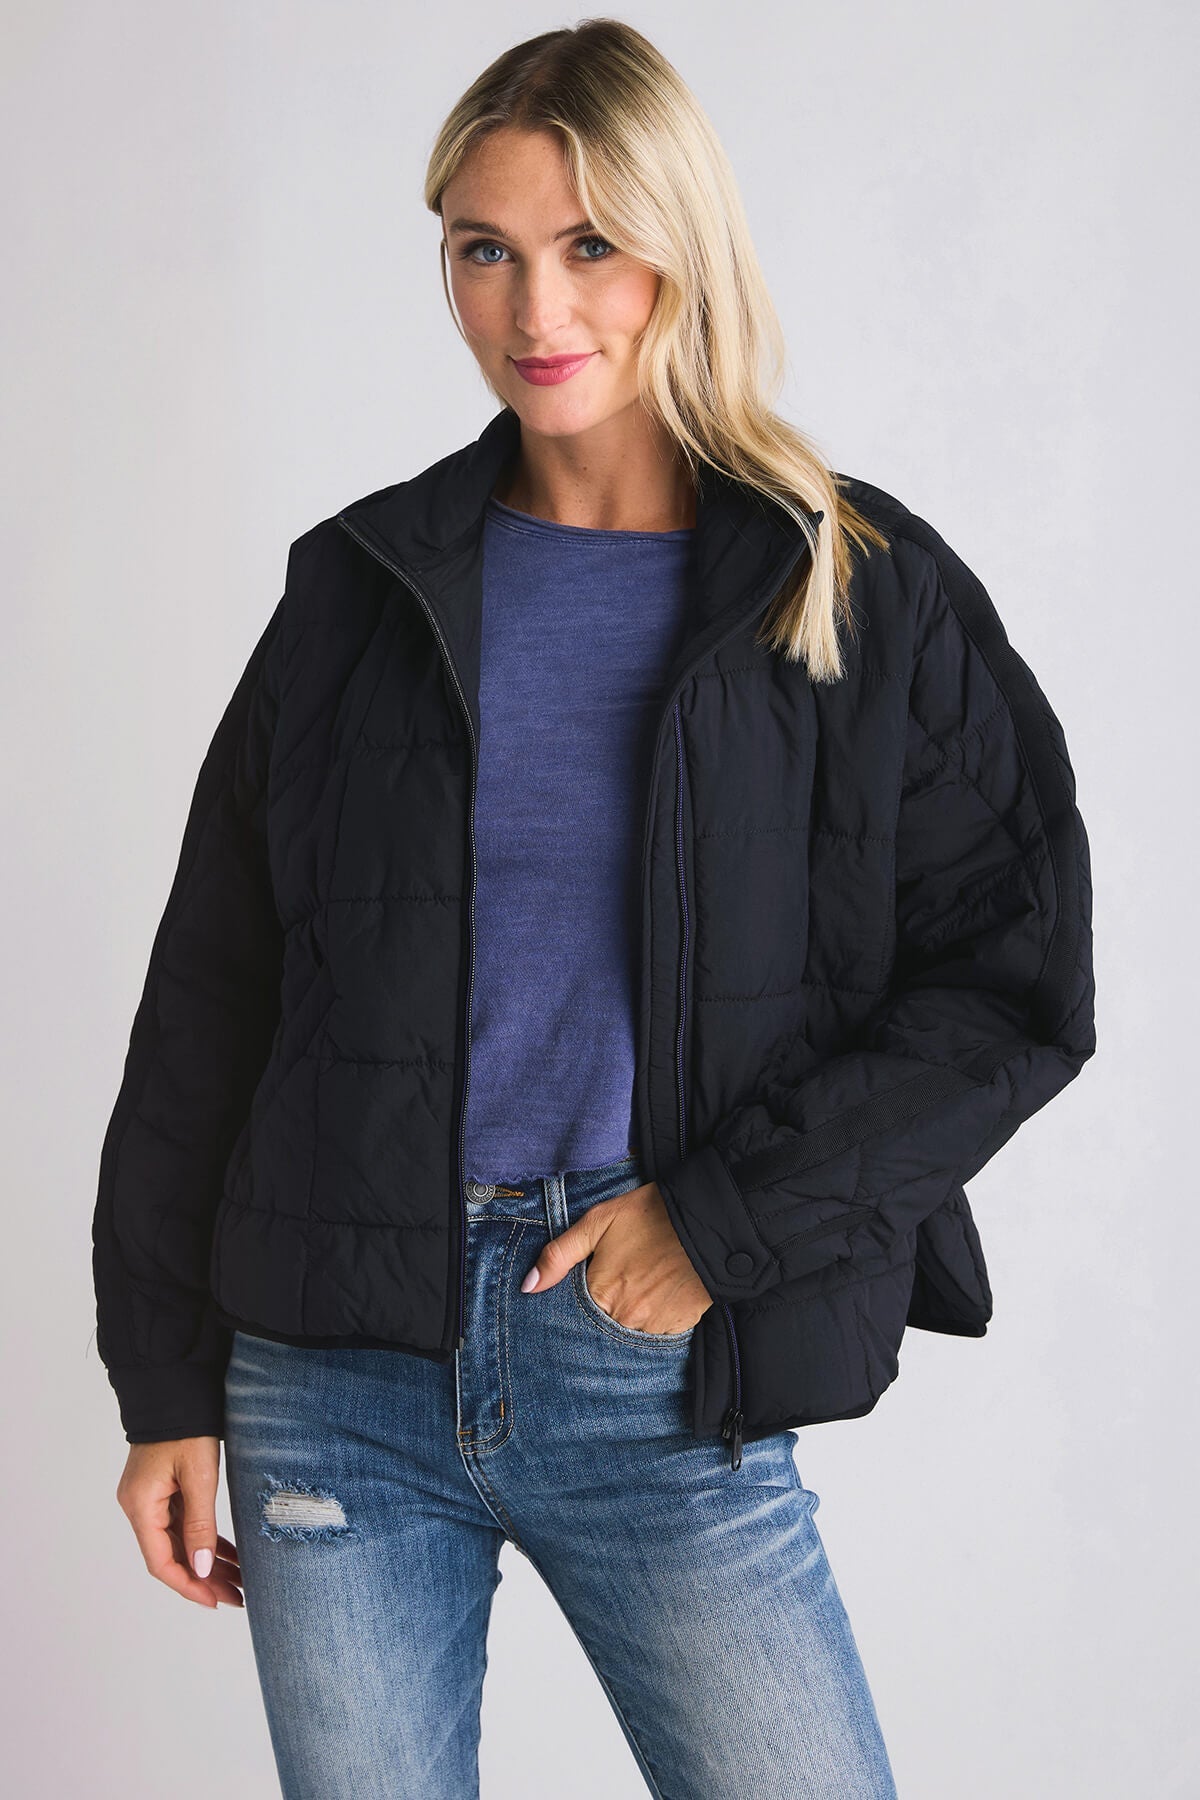 Free People Bestselling Pippa Packable Puffer Review